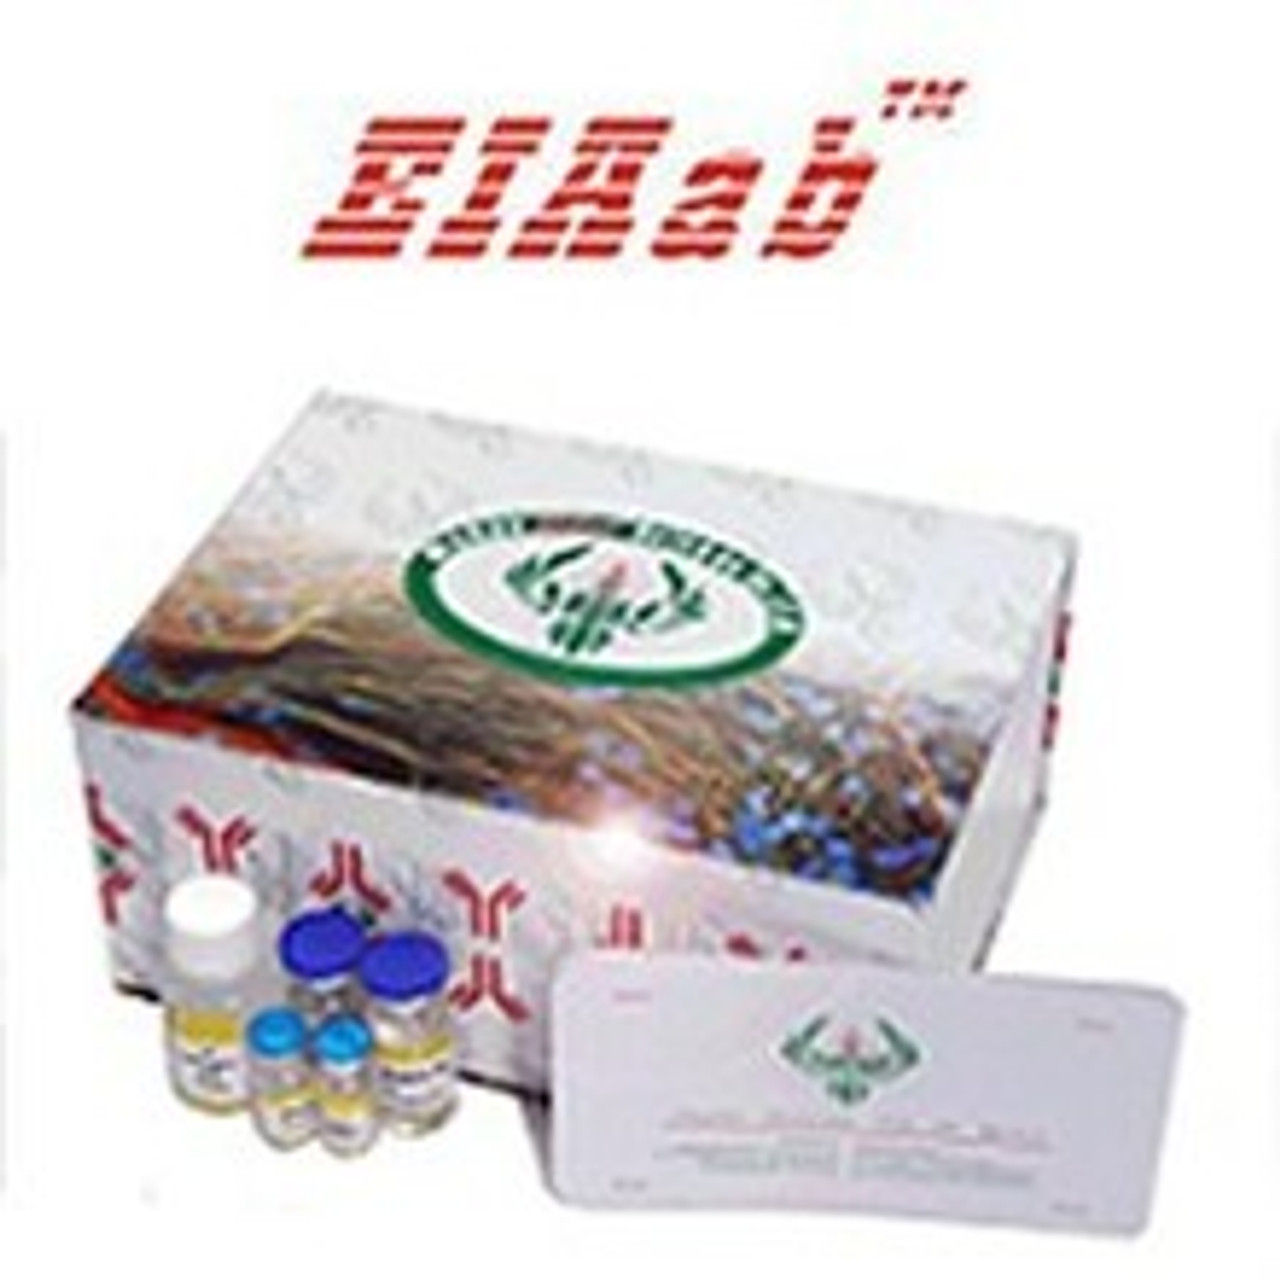 Mouse Gdf1/Embryonic growth/differentiation factor 1 ELISA Kit